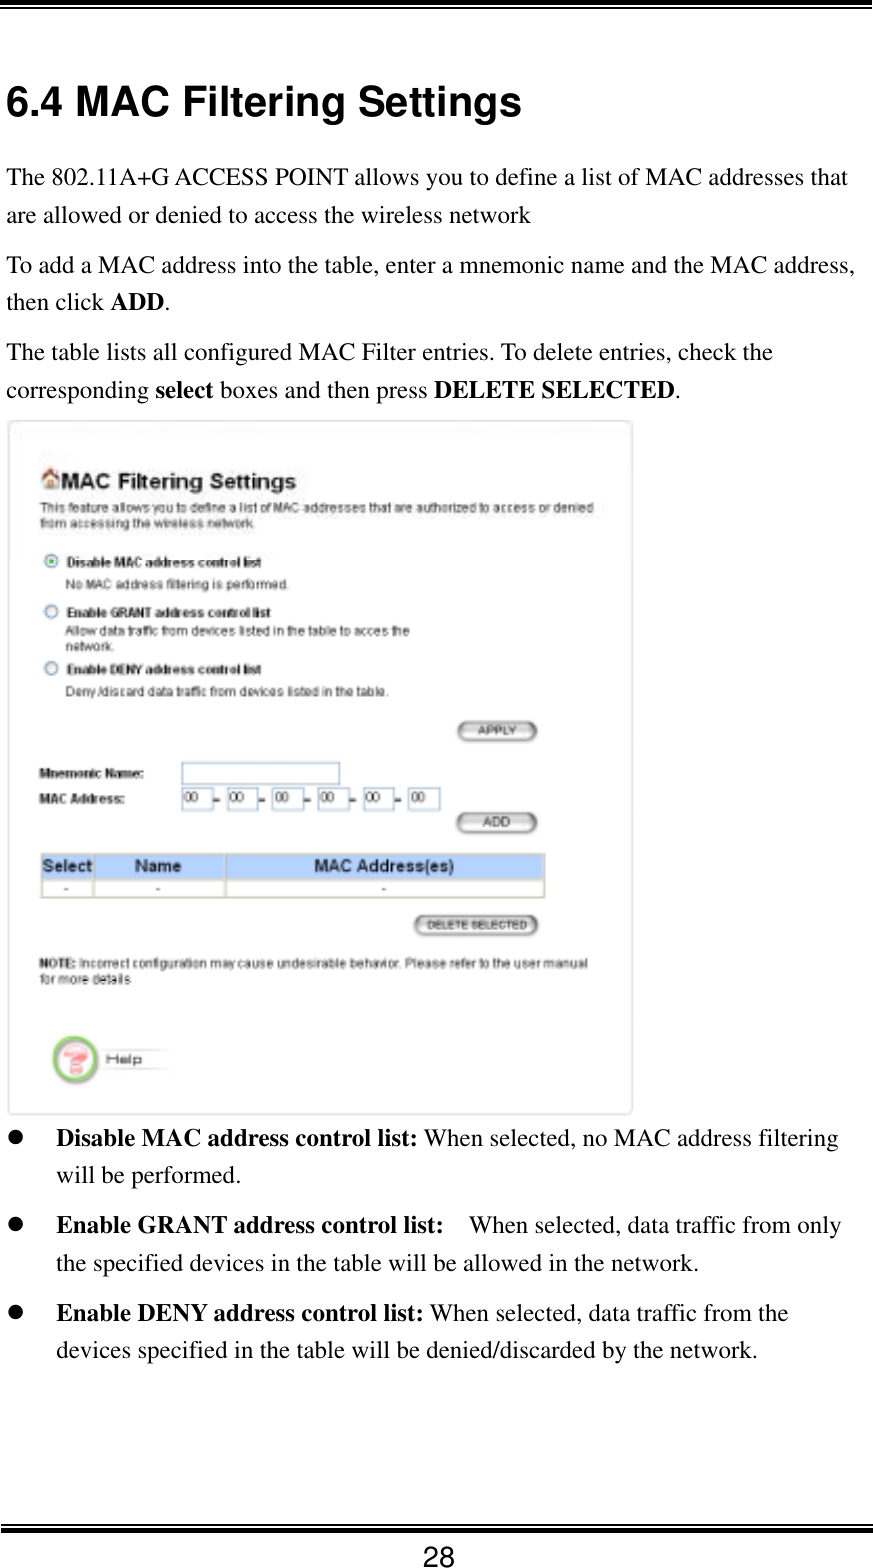  28 6.4 MAC Filtering Settings The 802.11A+G ACCESS POINT allows you to define a list of MAC addresses that are allowed or denied to access the wireless network   To add a MAC address into the table, enter a mnemonic name and the MAC address, then click ADD. The table lists all configured MAC Filter entries. To delete entries, check the corresponding select boxes and then press DELETE SELECTED.     Disable MAC address control list: When selected, no MAC address filtering will be performed.   Enable GRANT address control list:    When selected, data traffic from only the specified devices in the table will be allowed in the network.   Enable DENY address control list: When selected, data traffic from the devices specified in the table will be denied/discarded by the network.    